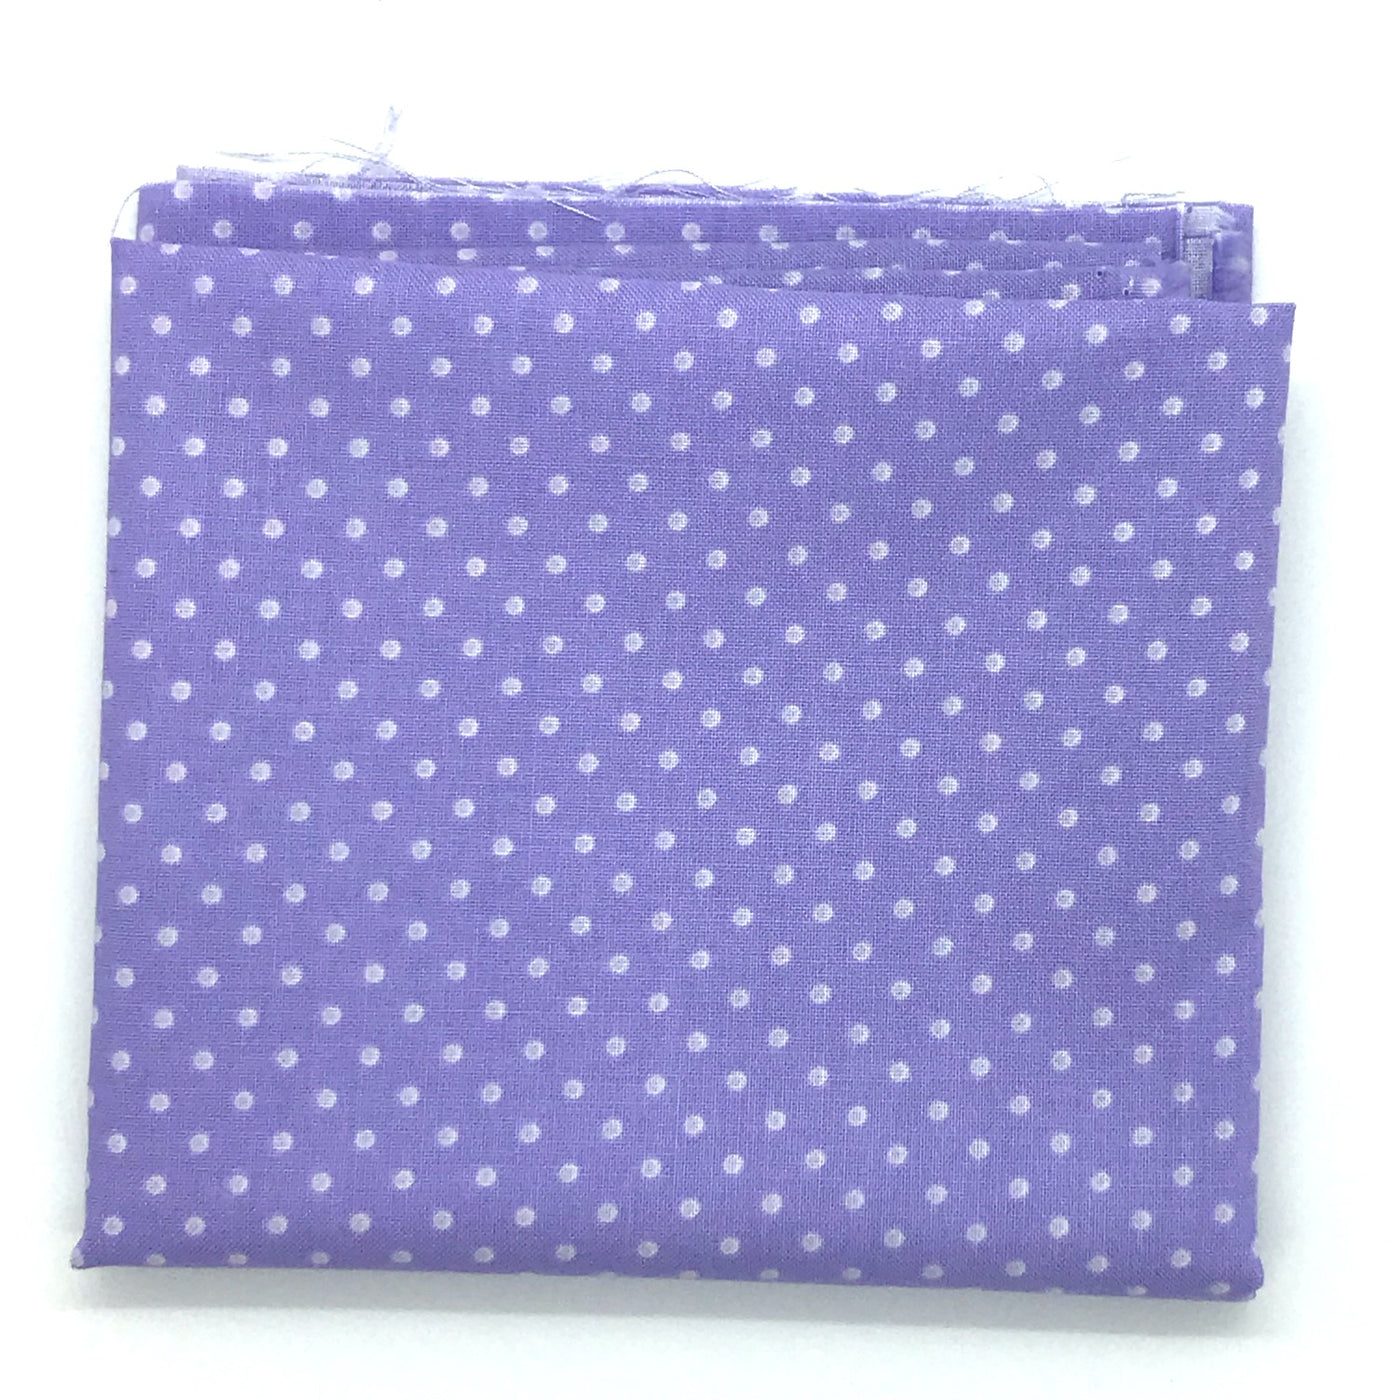 dots pattern from the Red Rooster basically hugs collection in purple